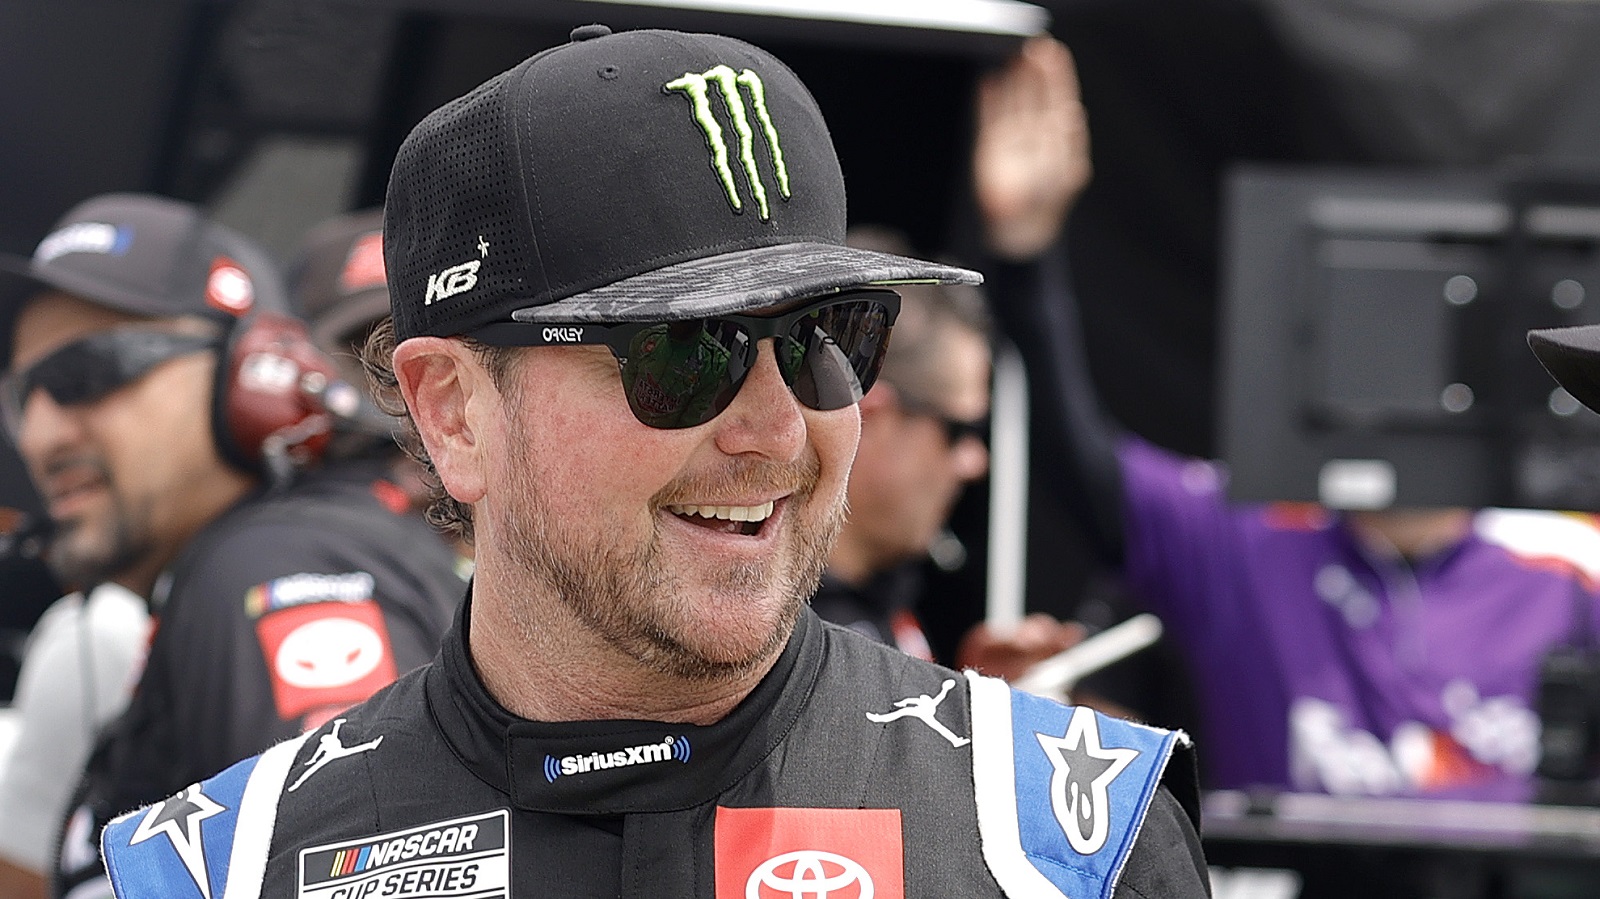 Kurt Busch on the grid during qualifying for the NASCAR Cup Series Ambetter 301 at New Hampshire Motor Speedway on July 16, 2022.